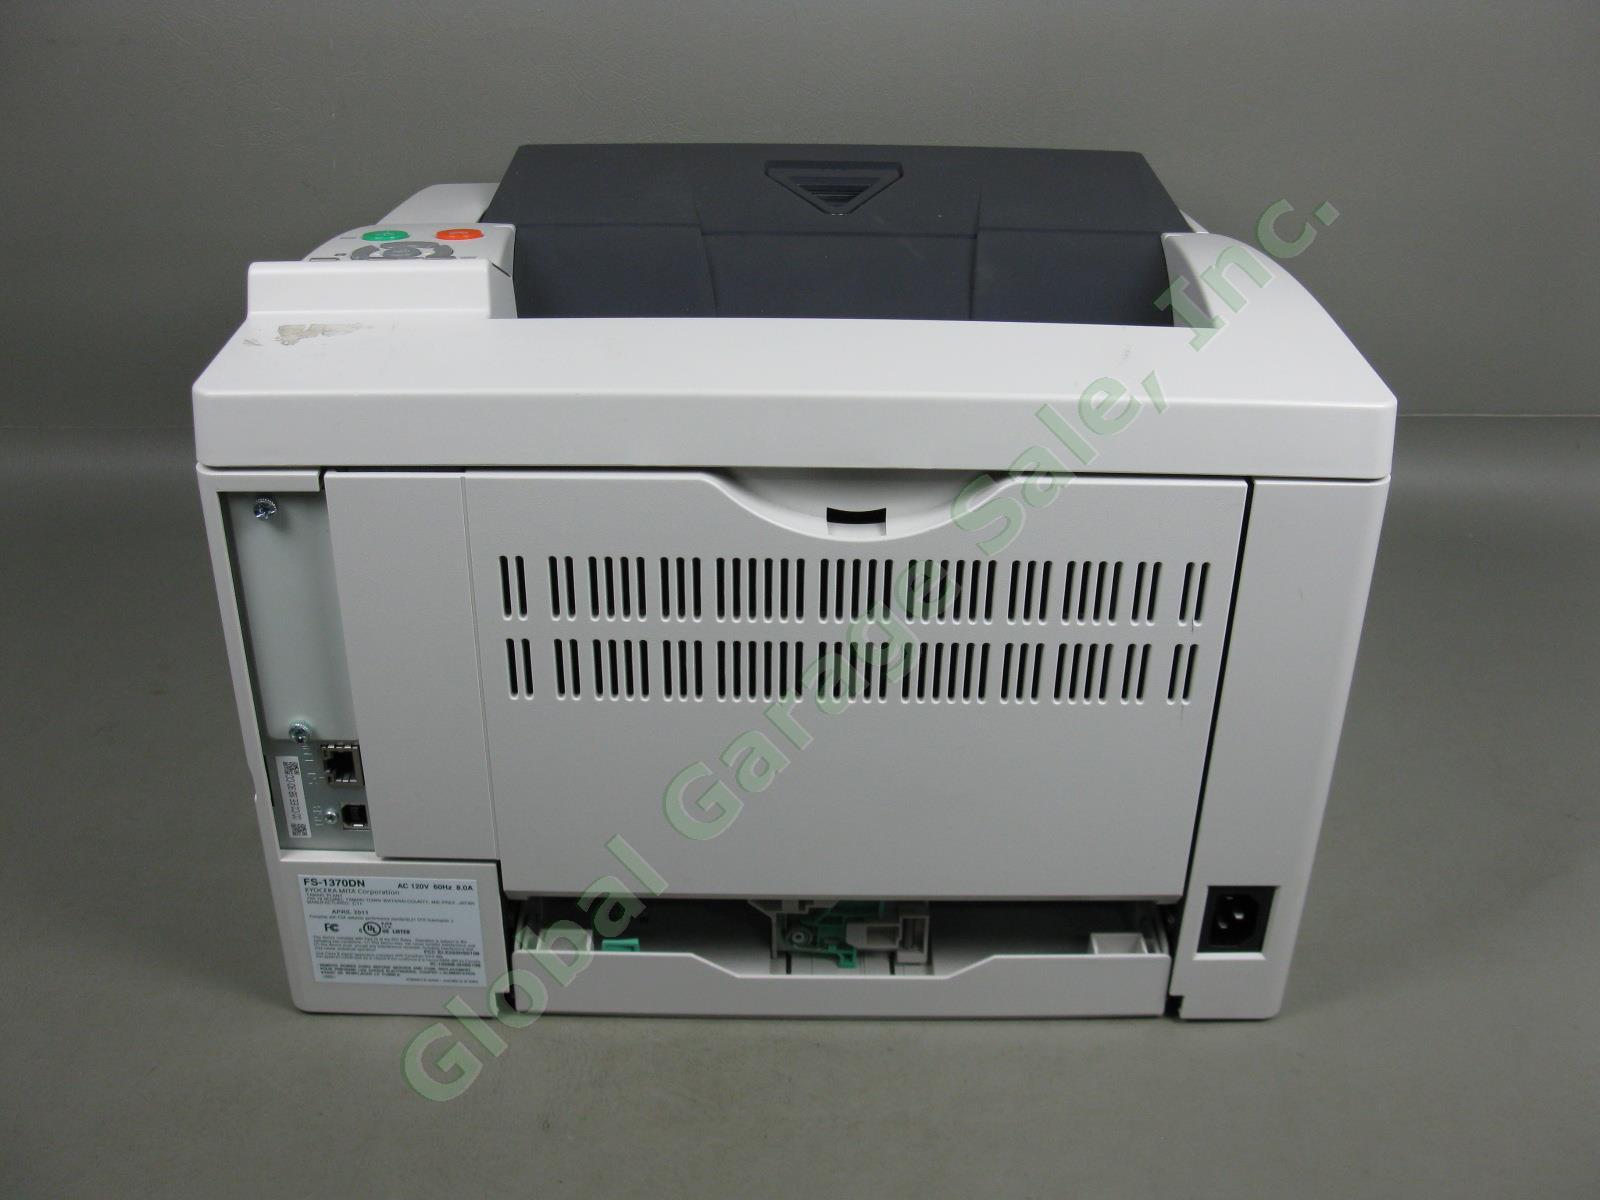 Kyocera Ecosys FS-1370DN Workgroup Network Laser Printer w/Toner 14509 Pages EXC 4